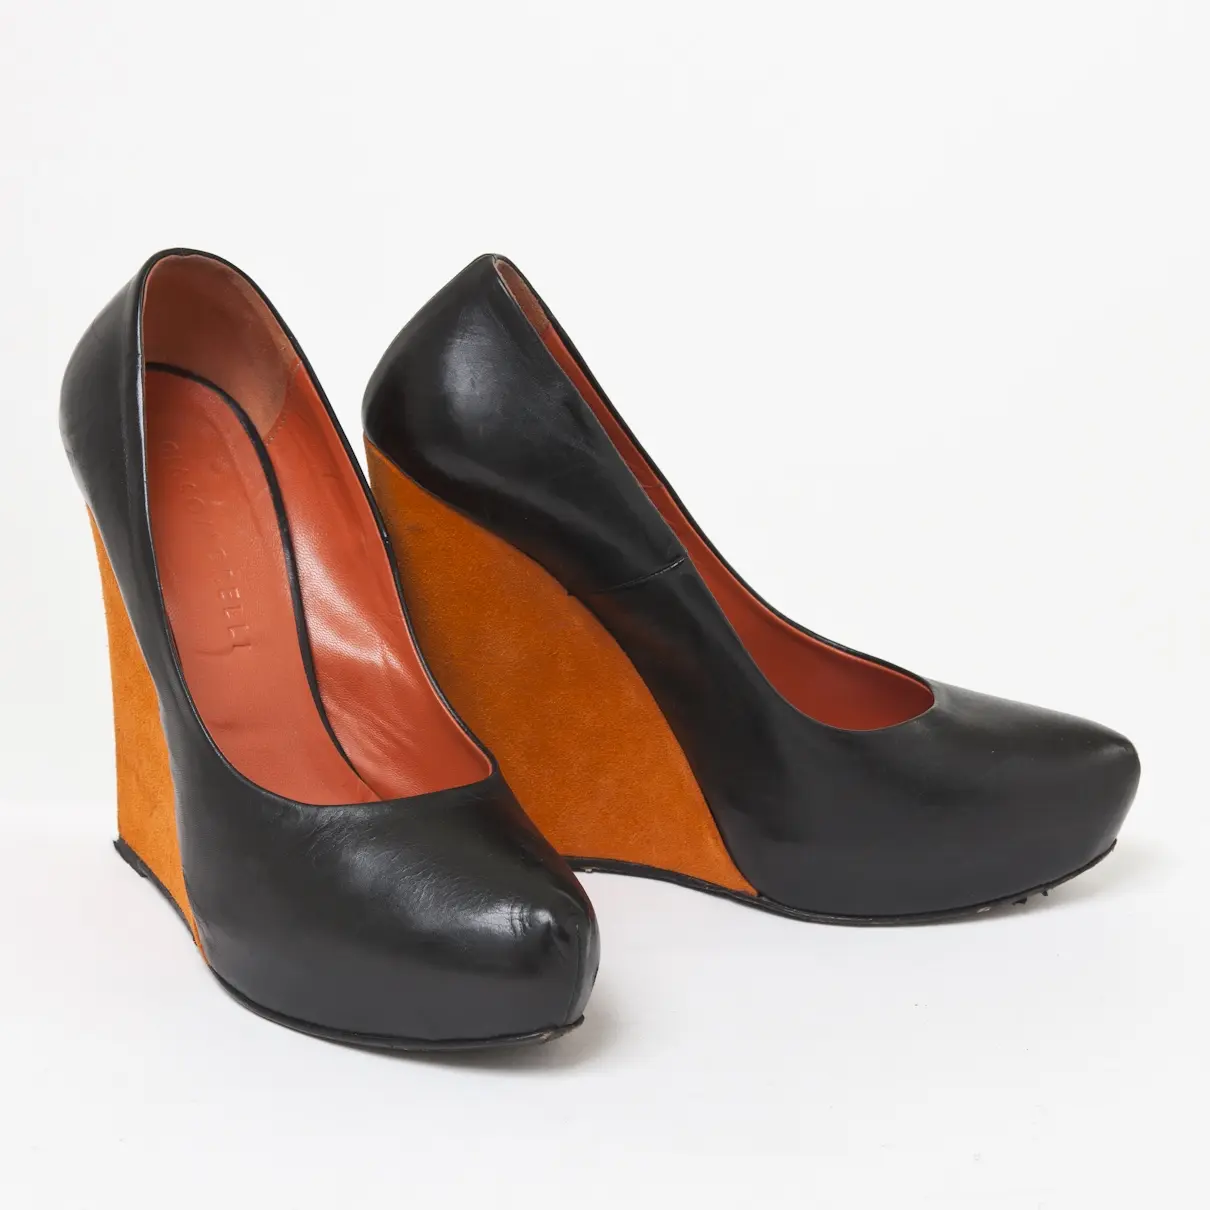 Giacomorelli Leather heels for sale